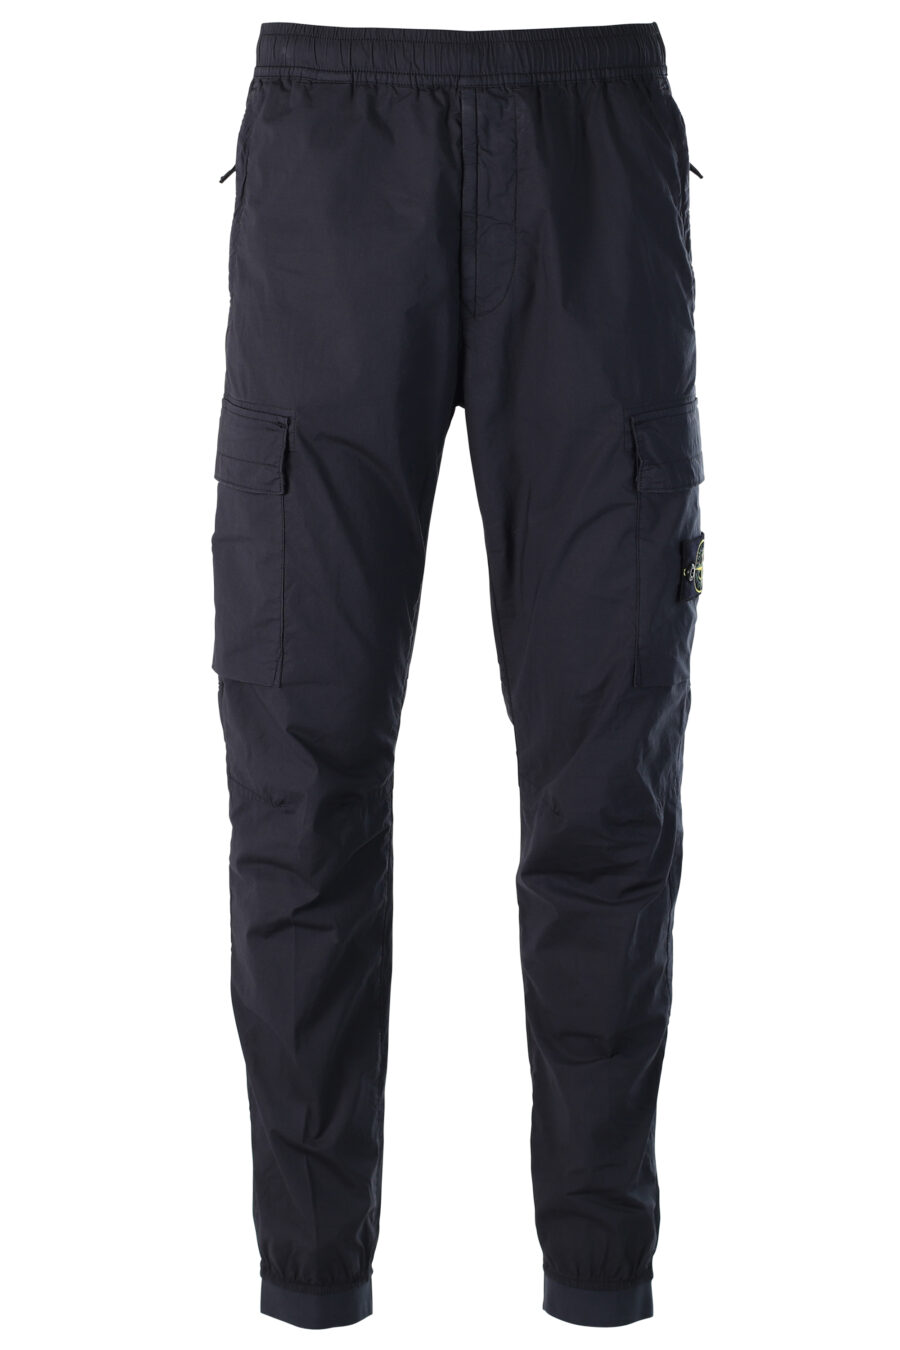 Dark blue cargo style trousers with snap and patch - 8052572510984